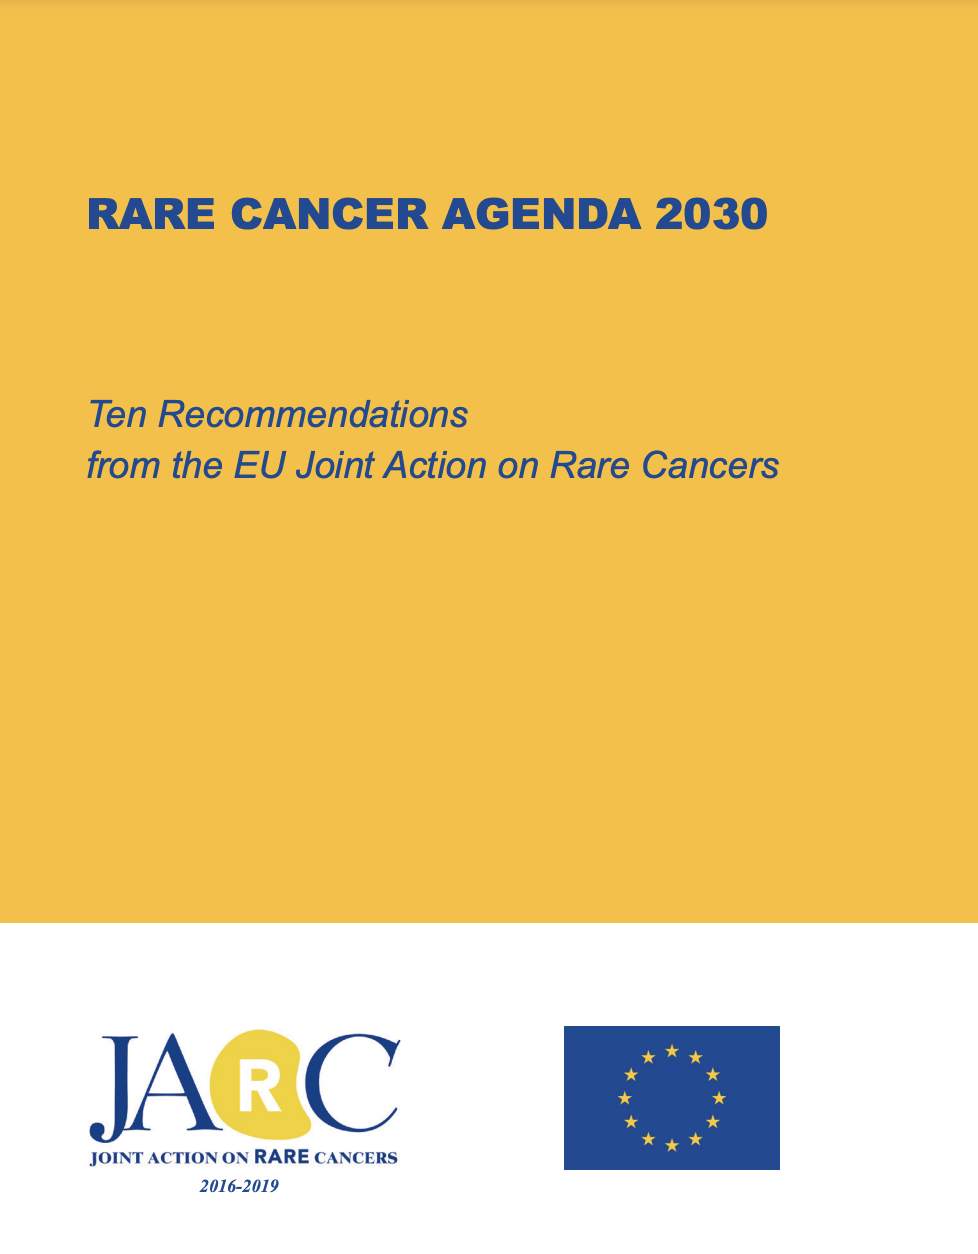 RARE CANCER AGENDA 2030 – Ten Recommendations from the EU Joint Action on Rare Cancers